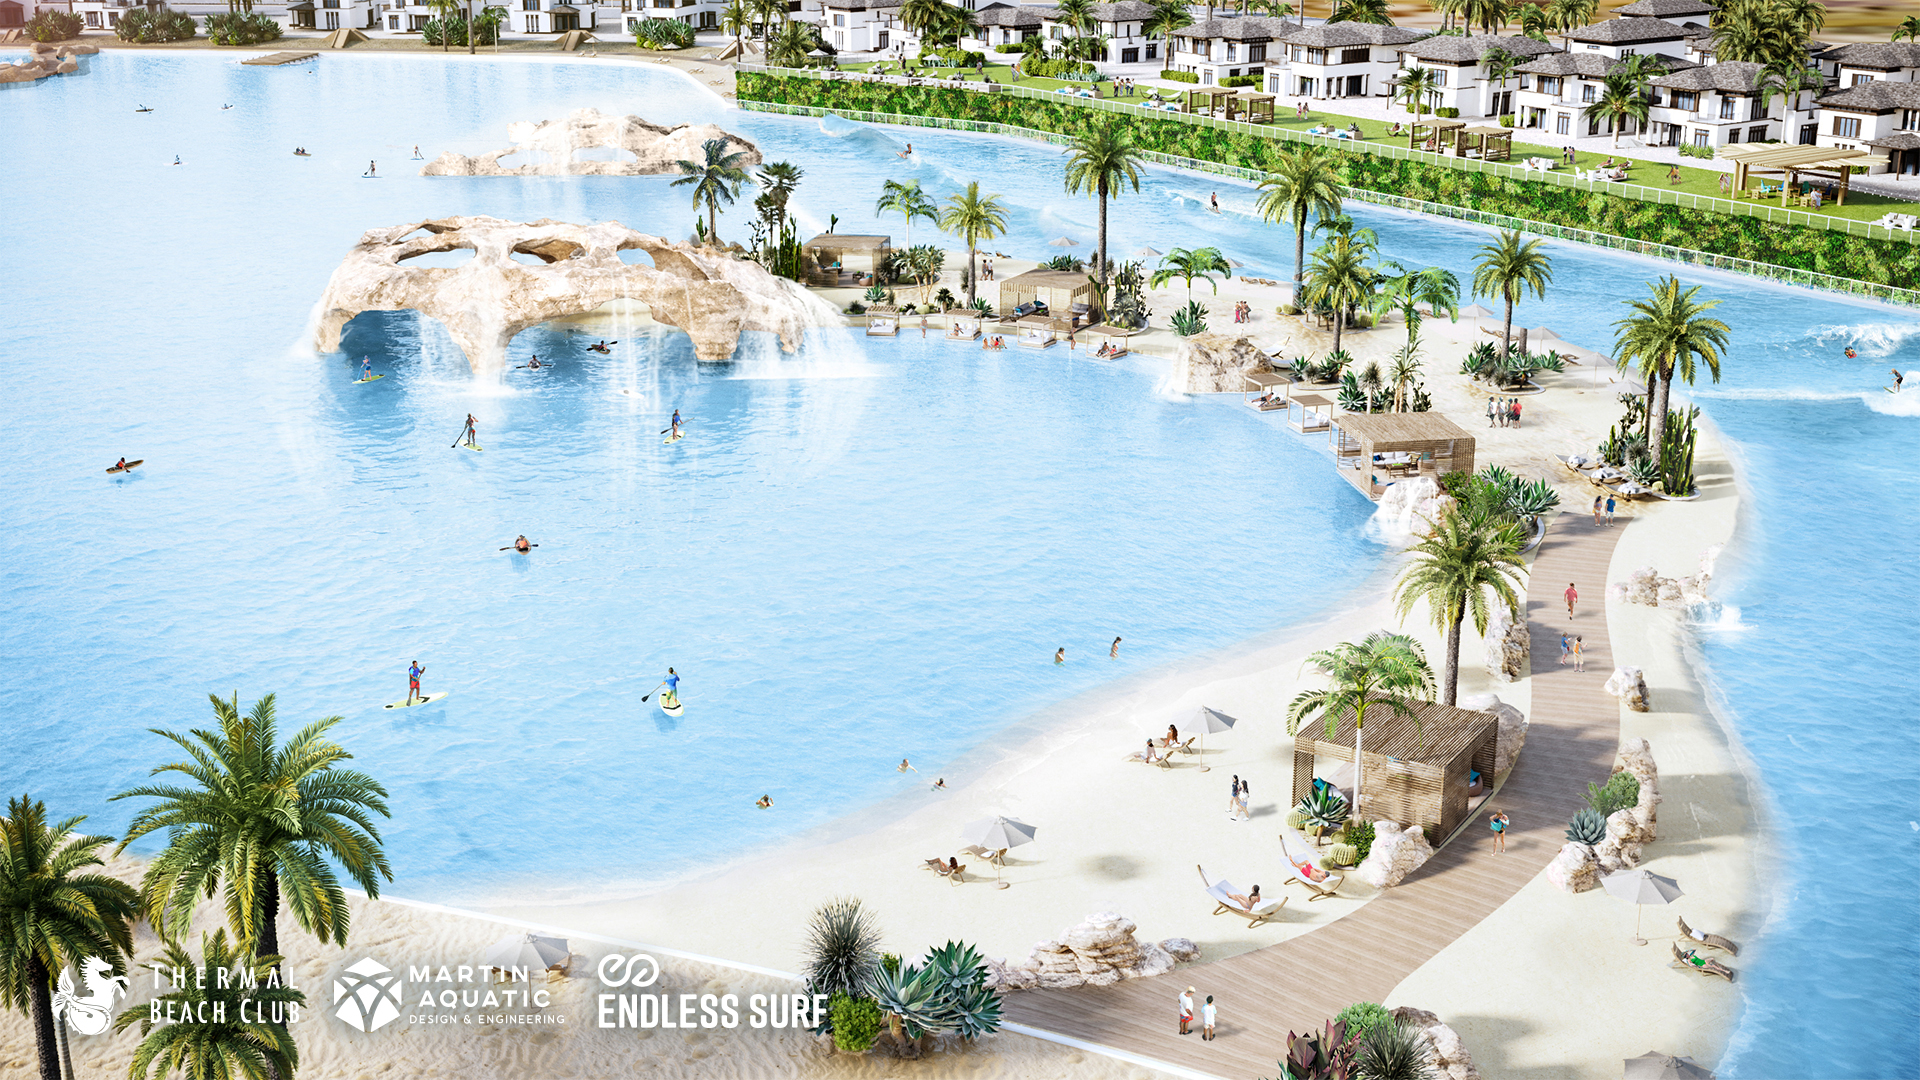 Rendering of the 20-acre lake planned for Thermal Beach Club in Coachella Valley, California